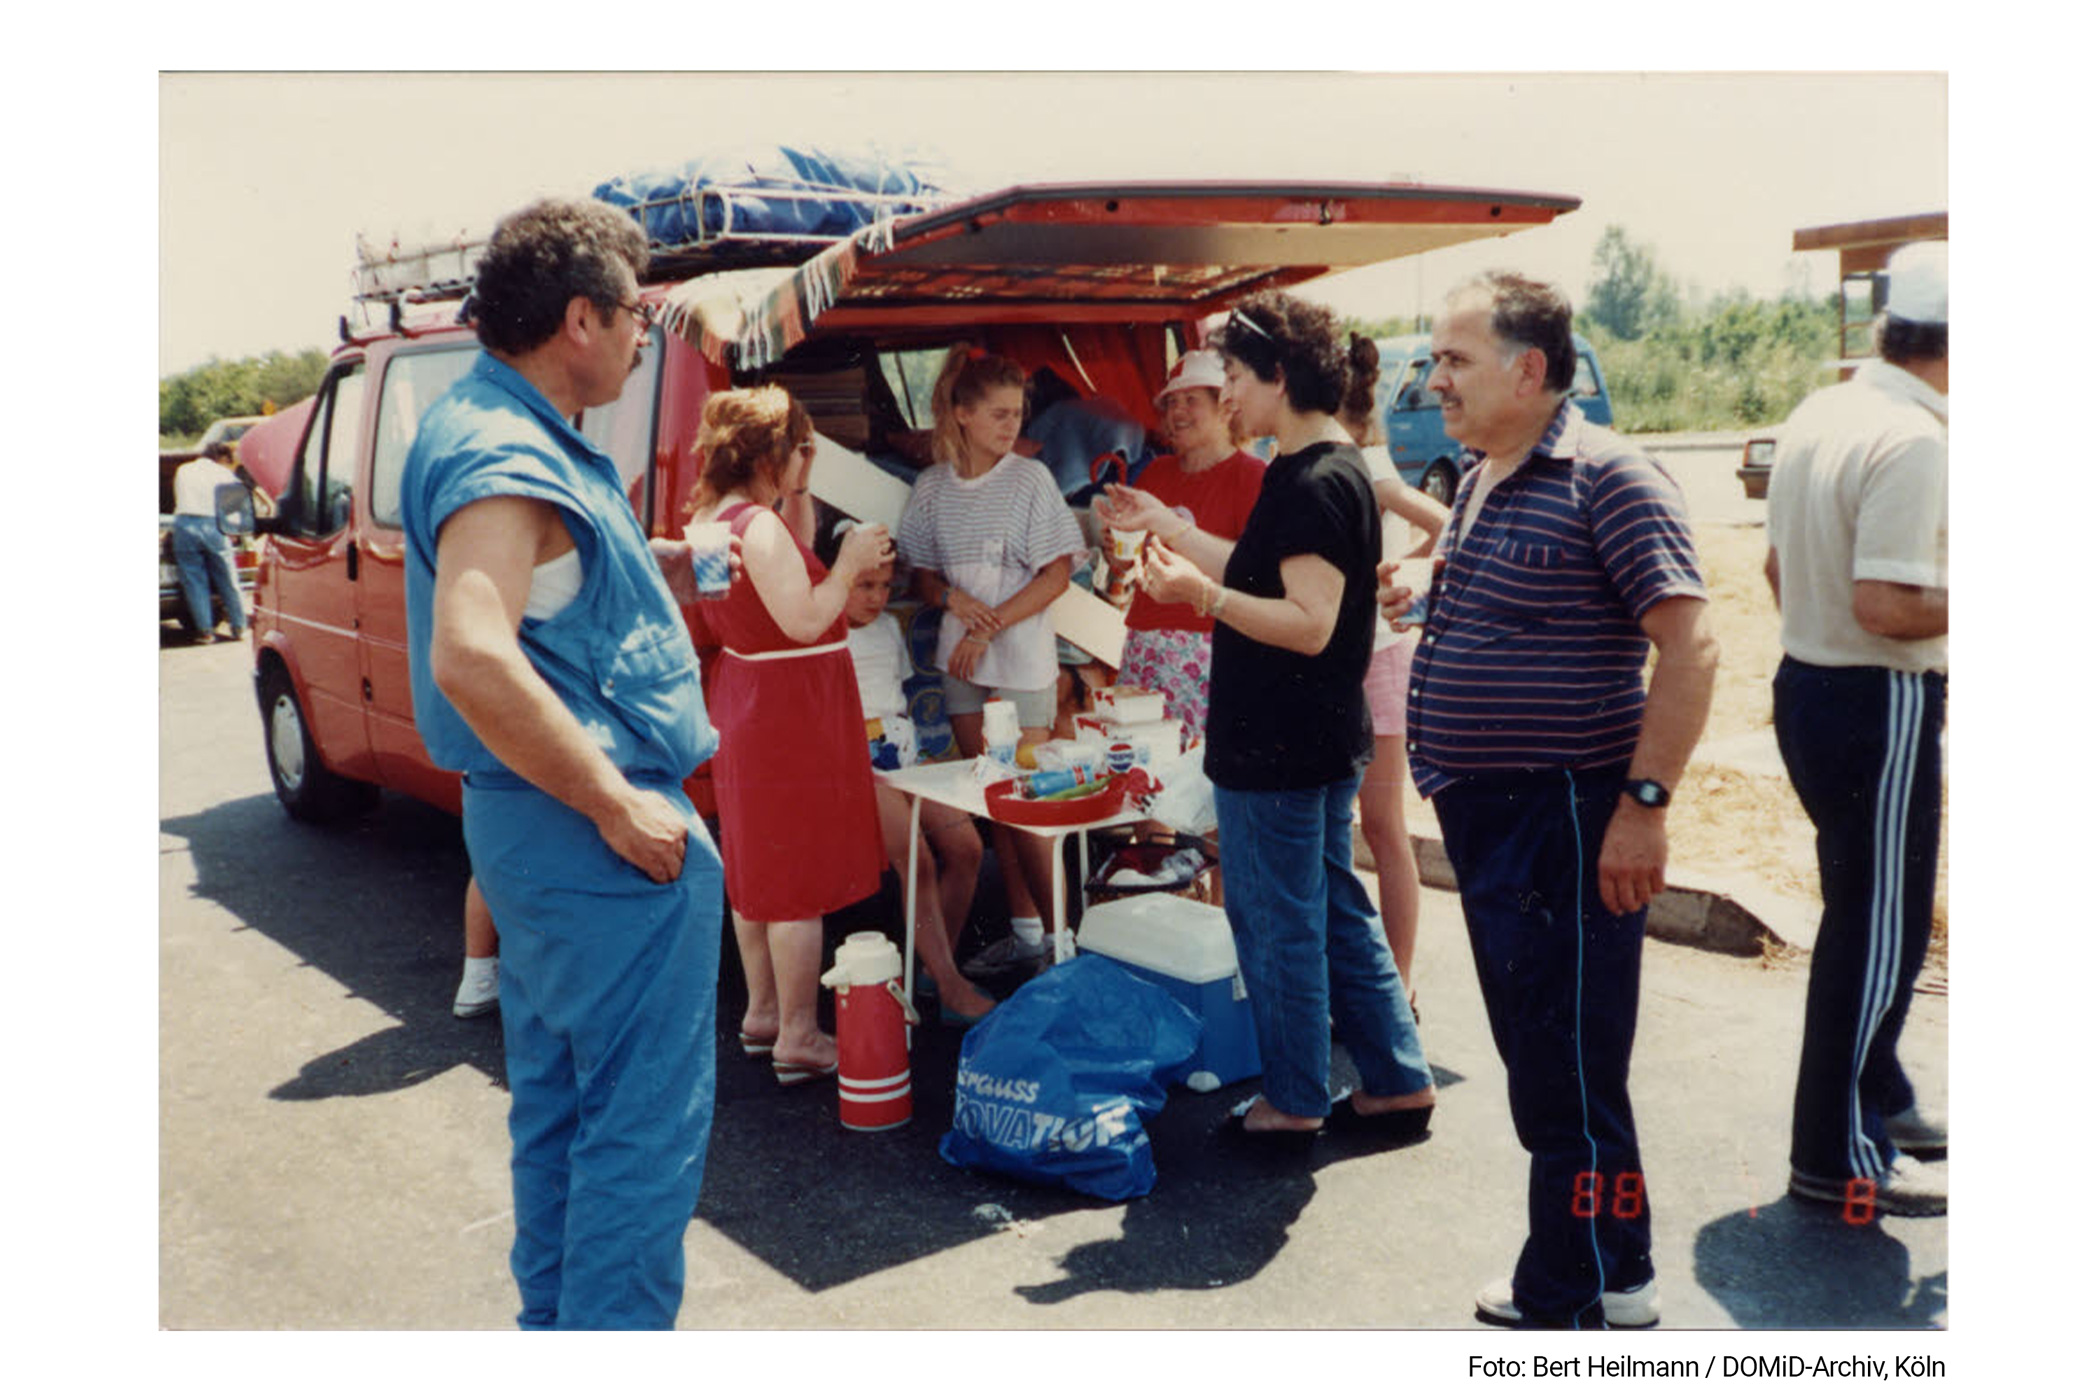 The German family H. and the Turkish family G. knew each other from their common workplace, the car manufacturer Ford. This photo shows them on vacation together in Turkey in 1988. The picture was possibly taken during a break from the car trips that often lasted for days. Installing roof racks on vehicles offered a practical way to accommodate more luggage for the sometimes week-long vacations in the migrants' home countries.